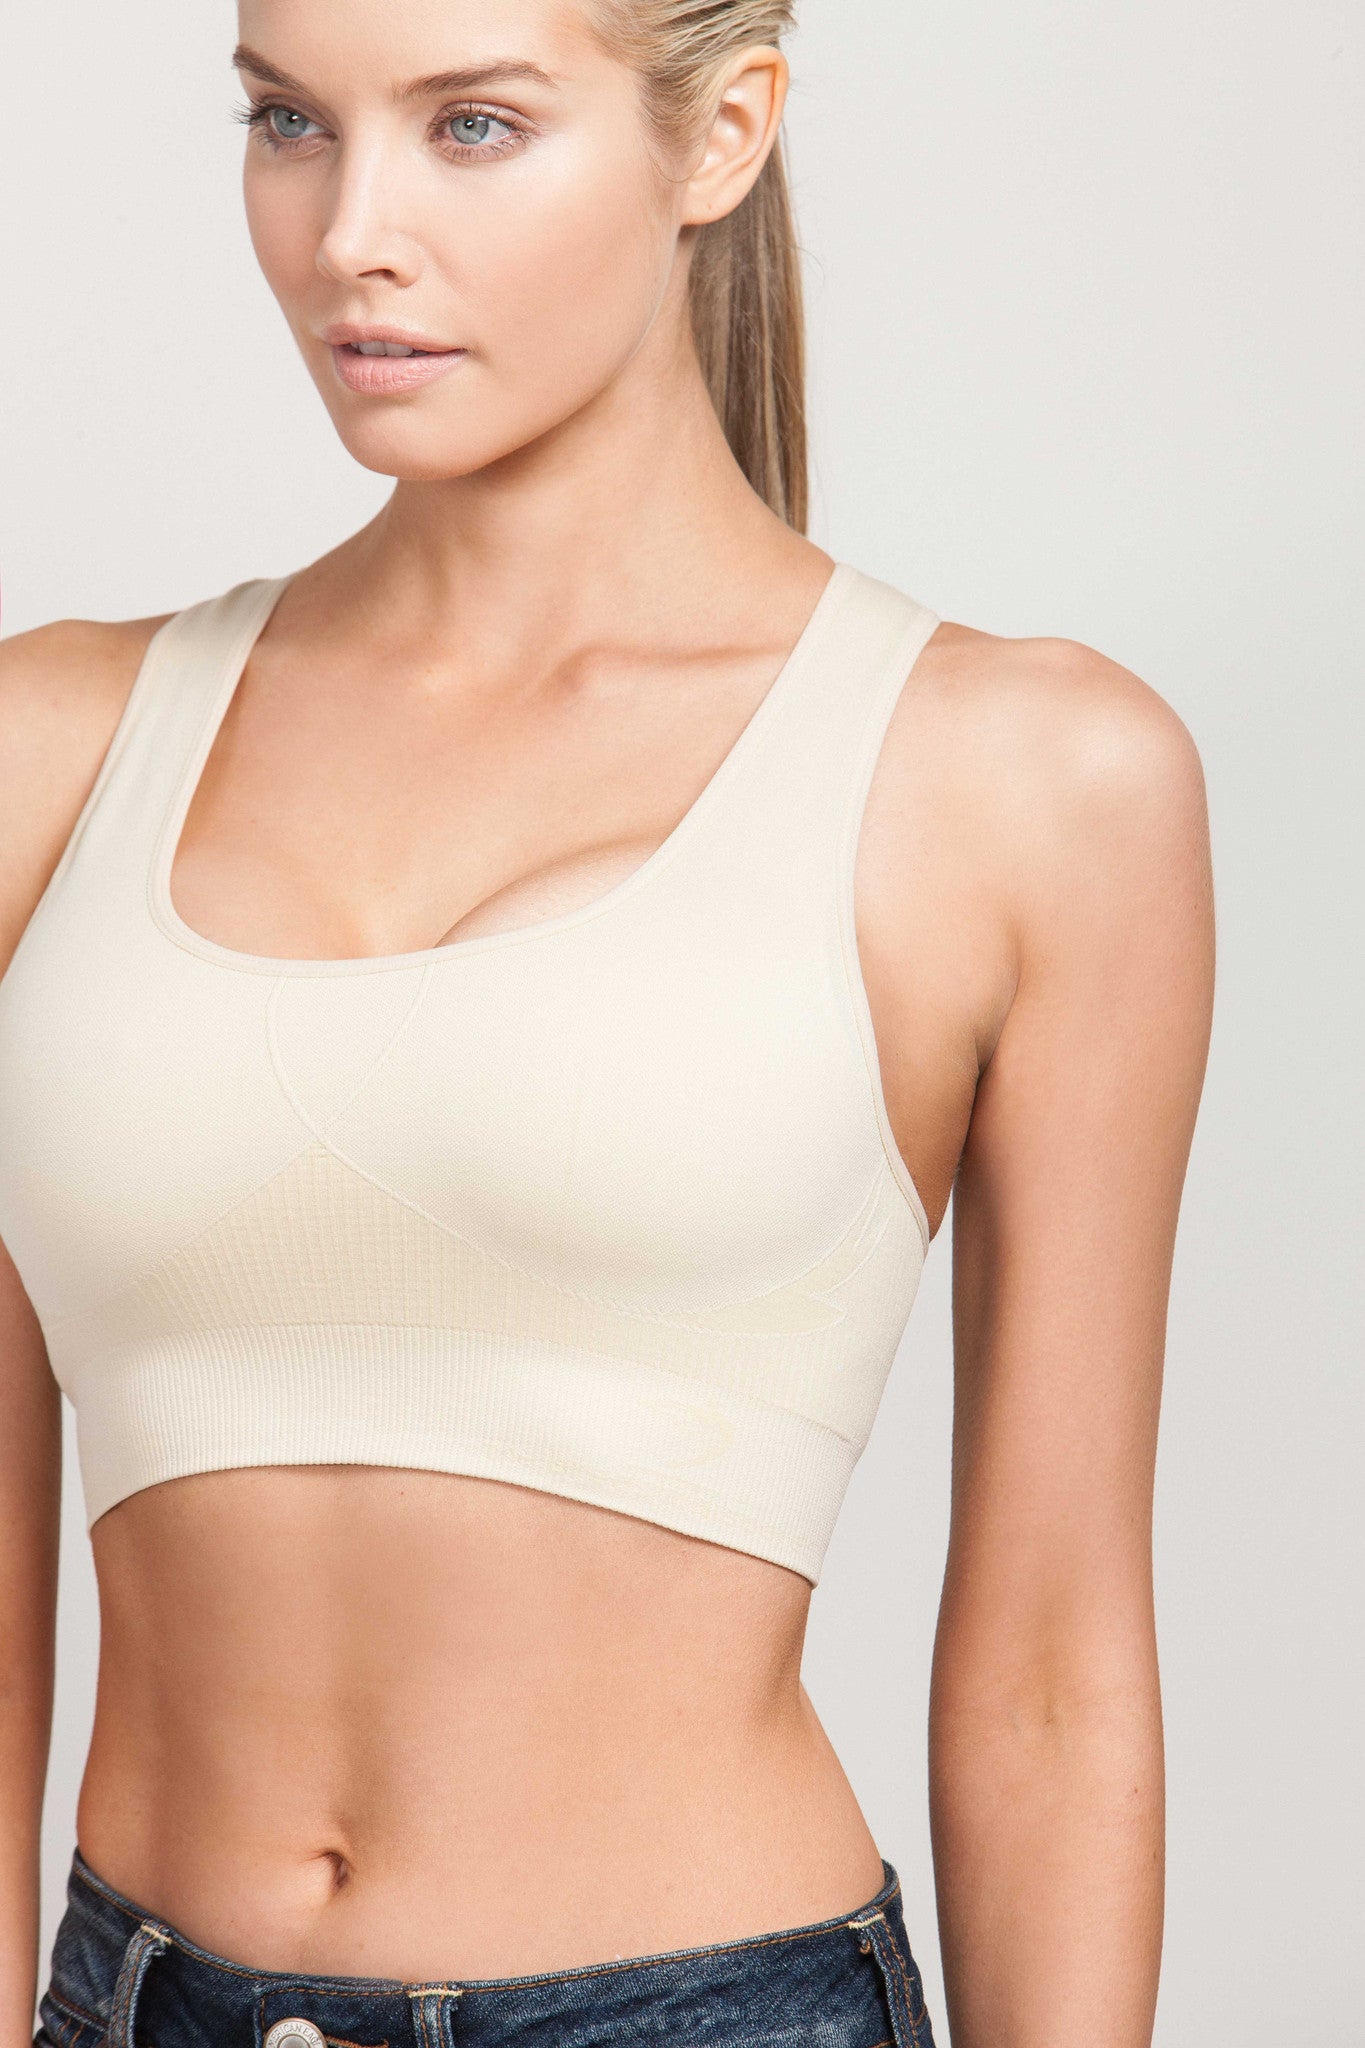 Breast Whisperer Bra for Augmented Women in Beige Front and Side